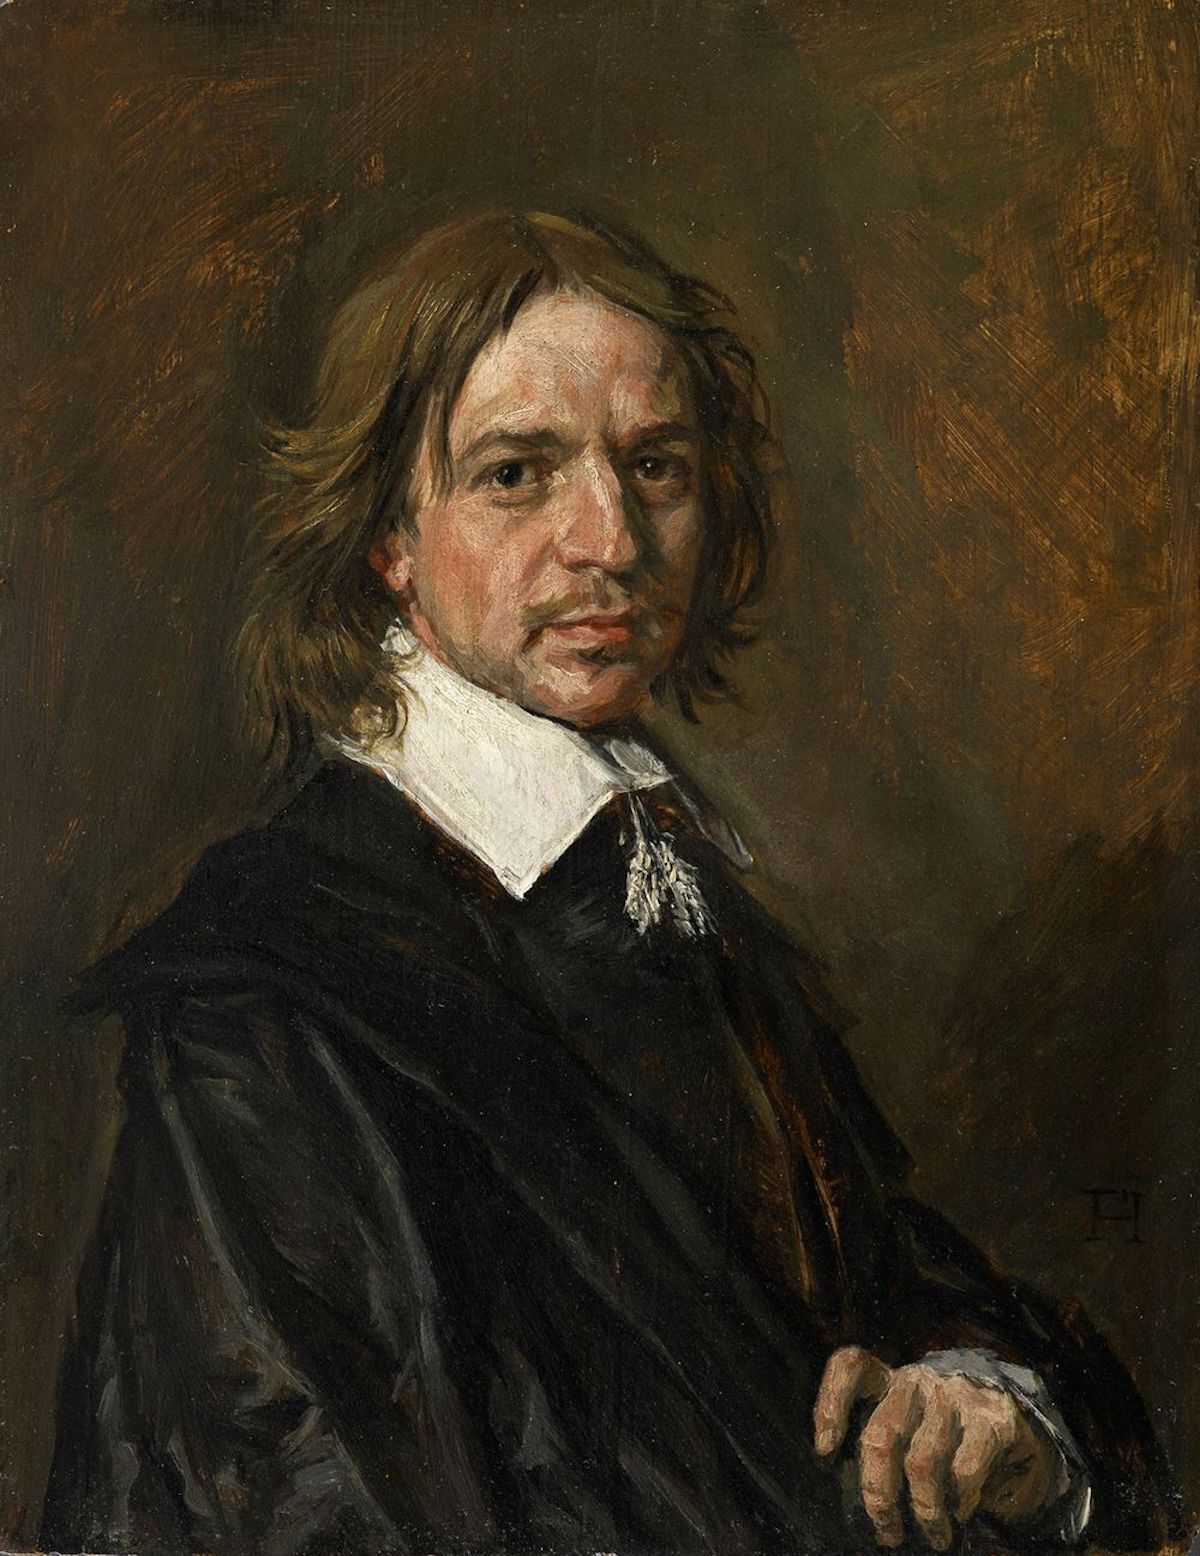 A painting, Portrait of a Man, once attributed to Frans Hals, but which Sotheby’s subsequently declared a forgery. Via Wikimedia Commons. 